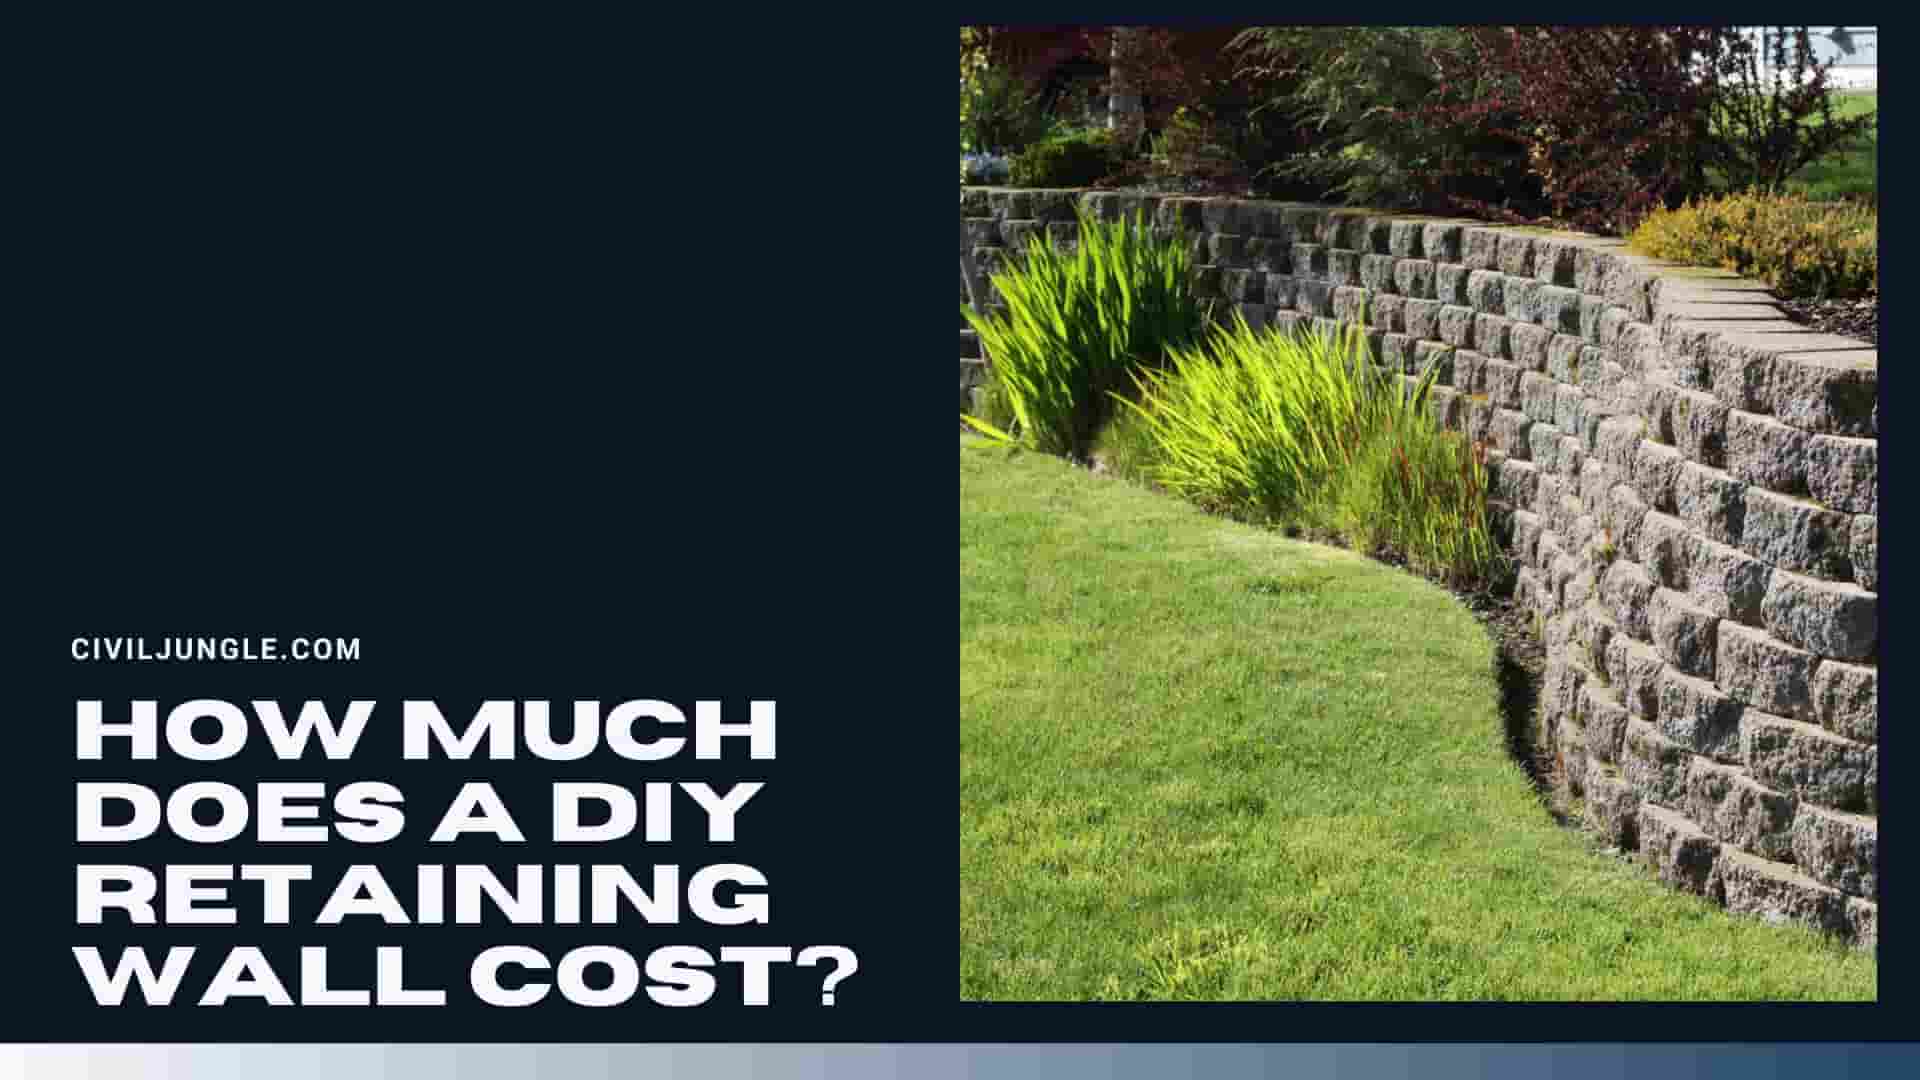 How Much Does a Diy Retaining Wall Cost?